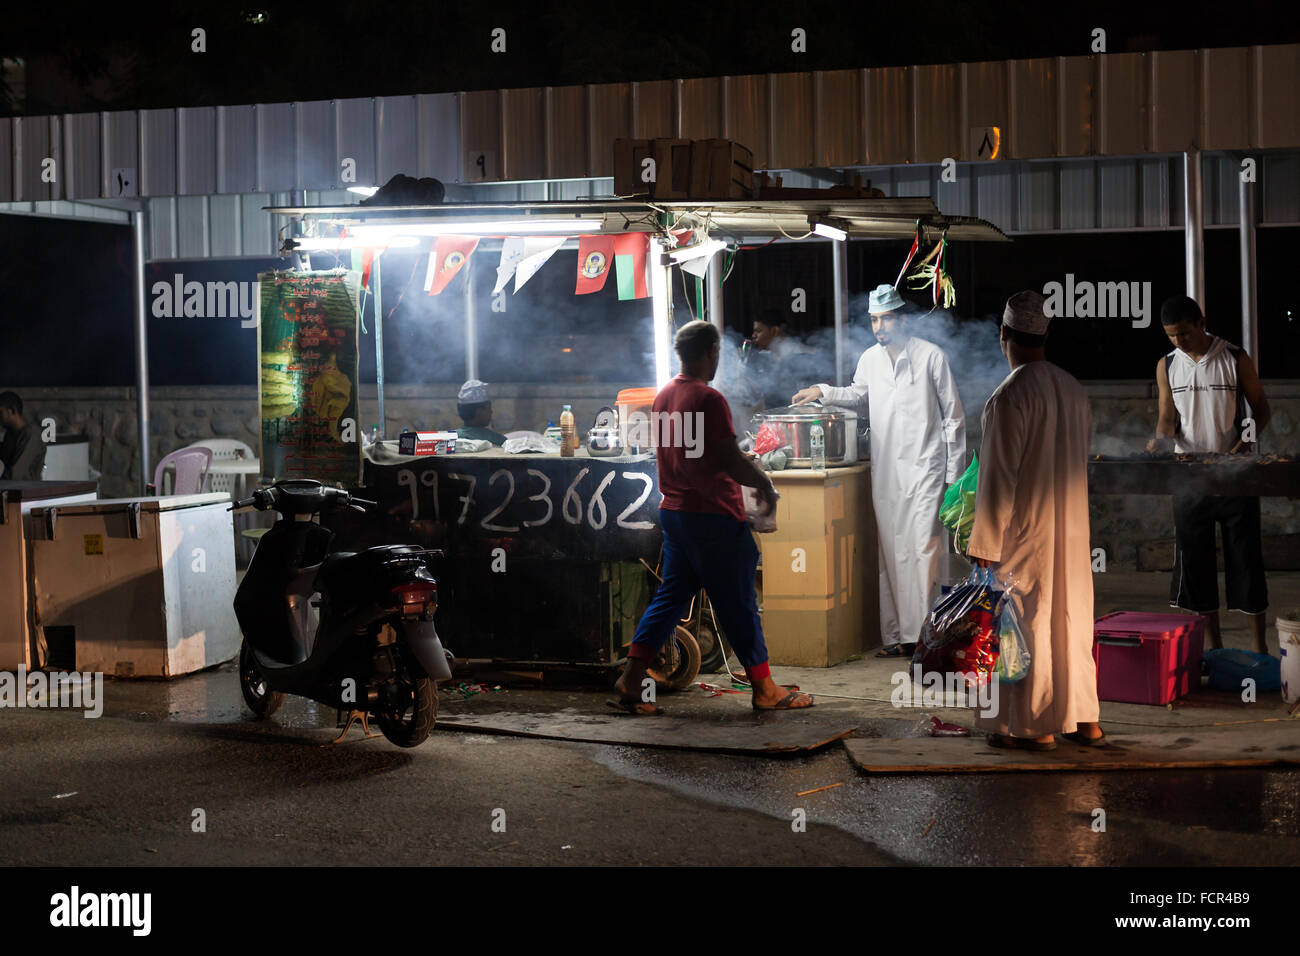 Food stand in the old town of Nizwa at night. Sultanate of Oman, Middle East Stock Photo